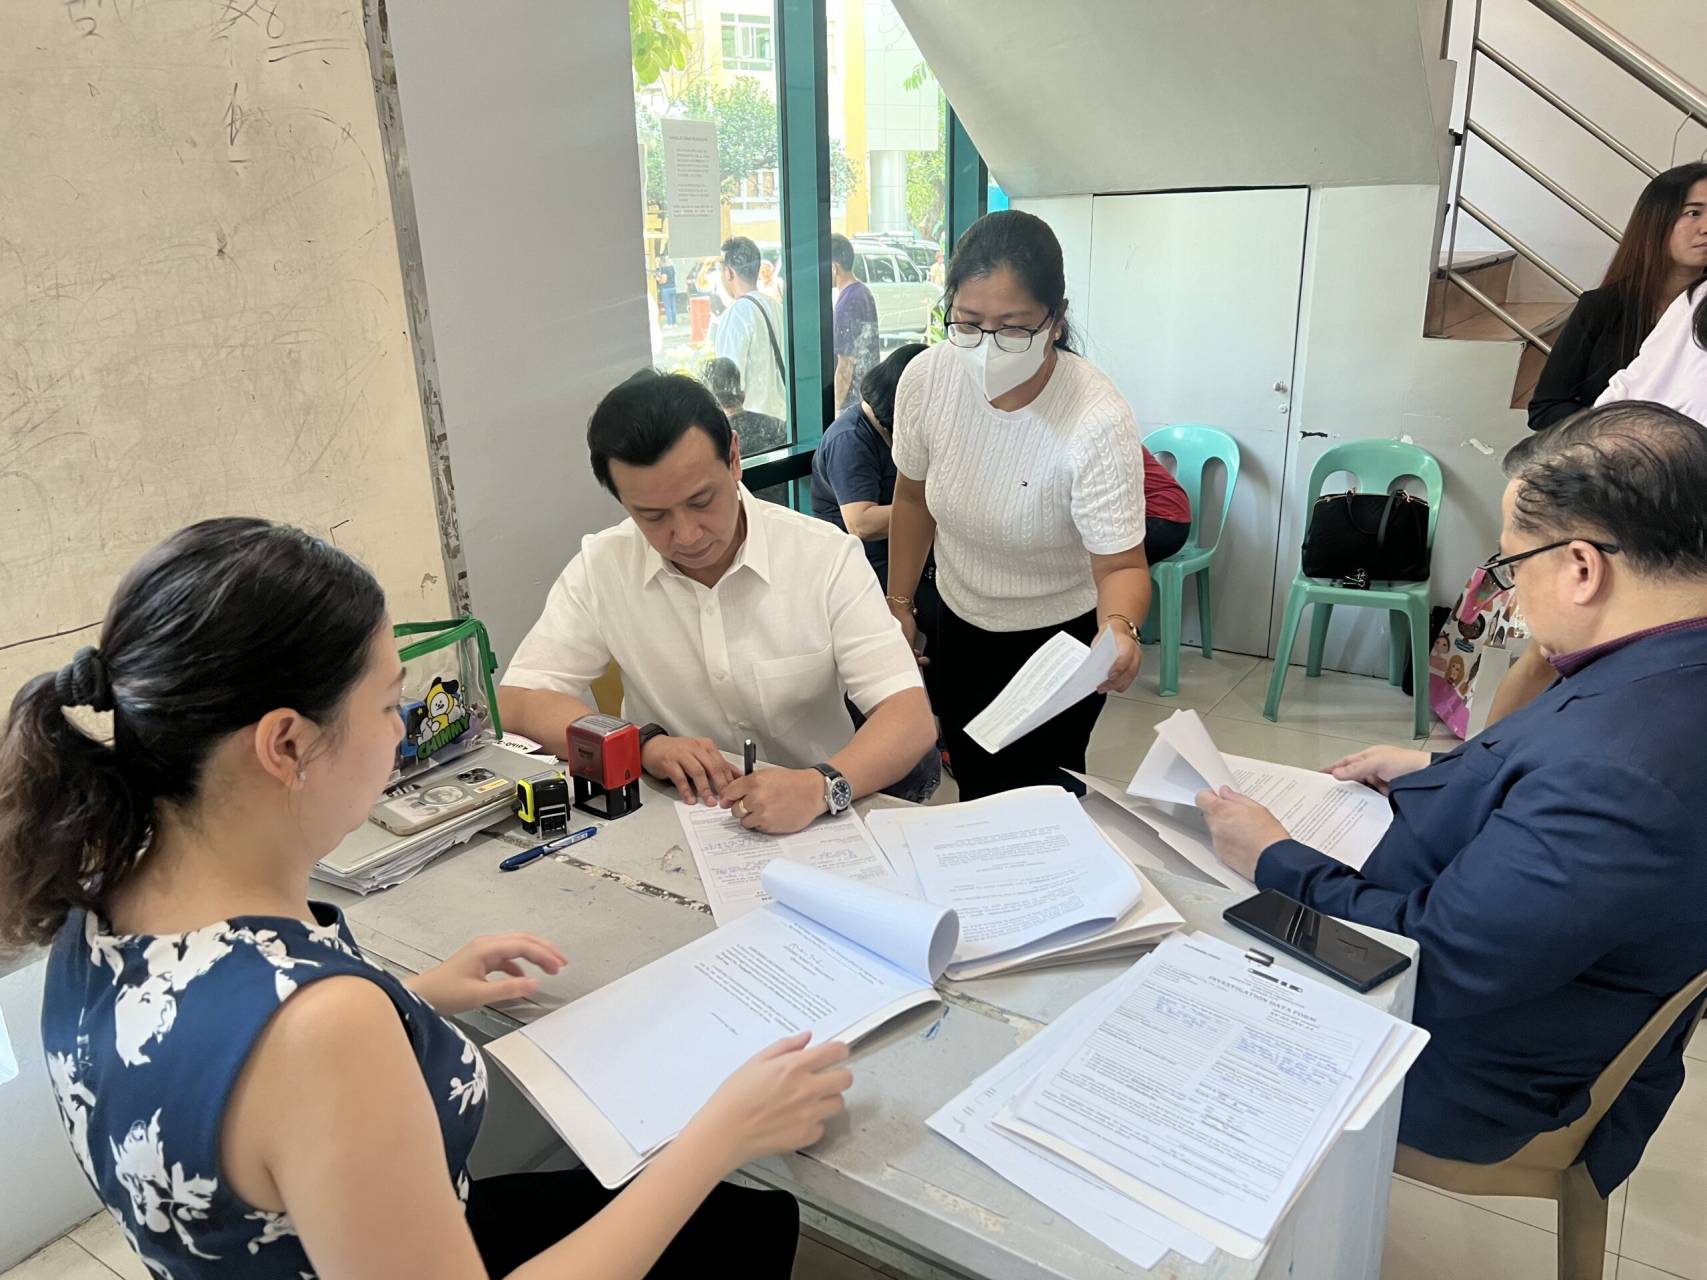 Former Senator Antonio Trillanes IV files libel and cyber libel cases before the Quezon City Prosecutor’s Office against “pro-Duterte” personalities and social media account holders due to “persistent online attacks and the dissemination of false accusations.” 